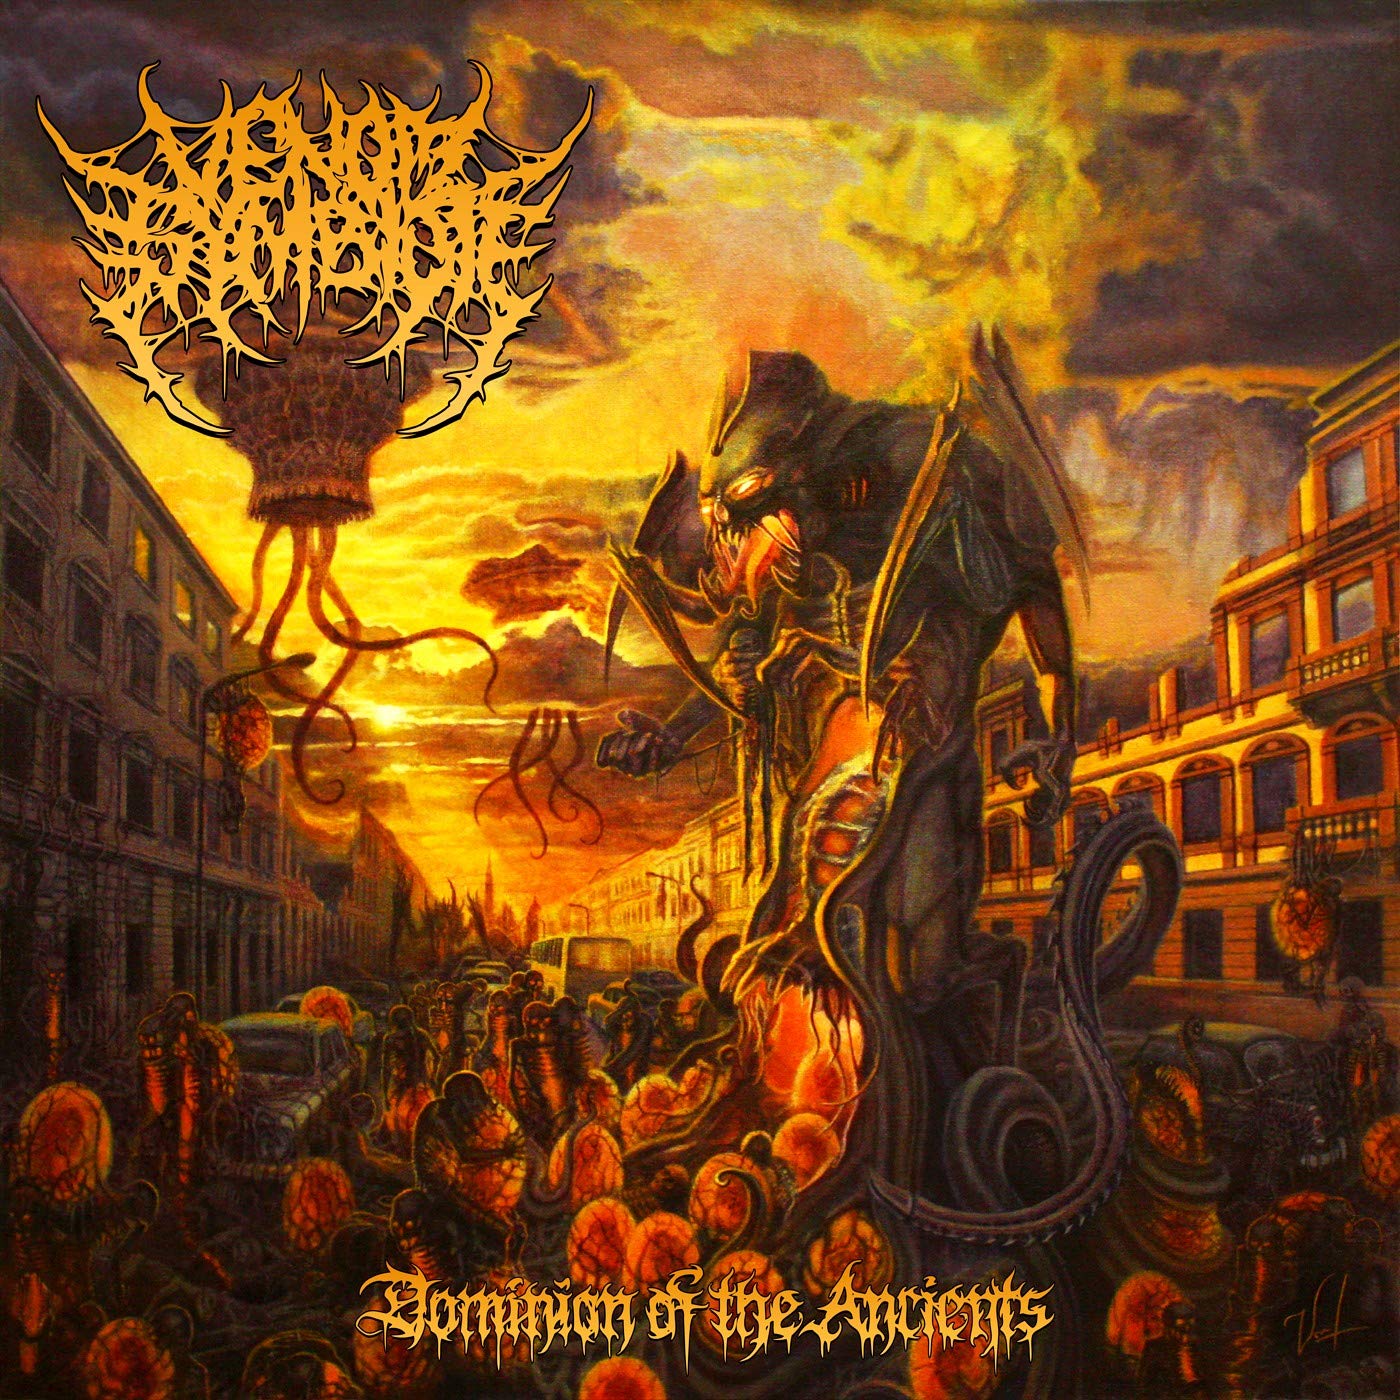 Venom Symbiote-Dominion of the Ancients-(UNG038)-CD-FLAC-2020-86D